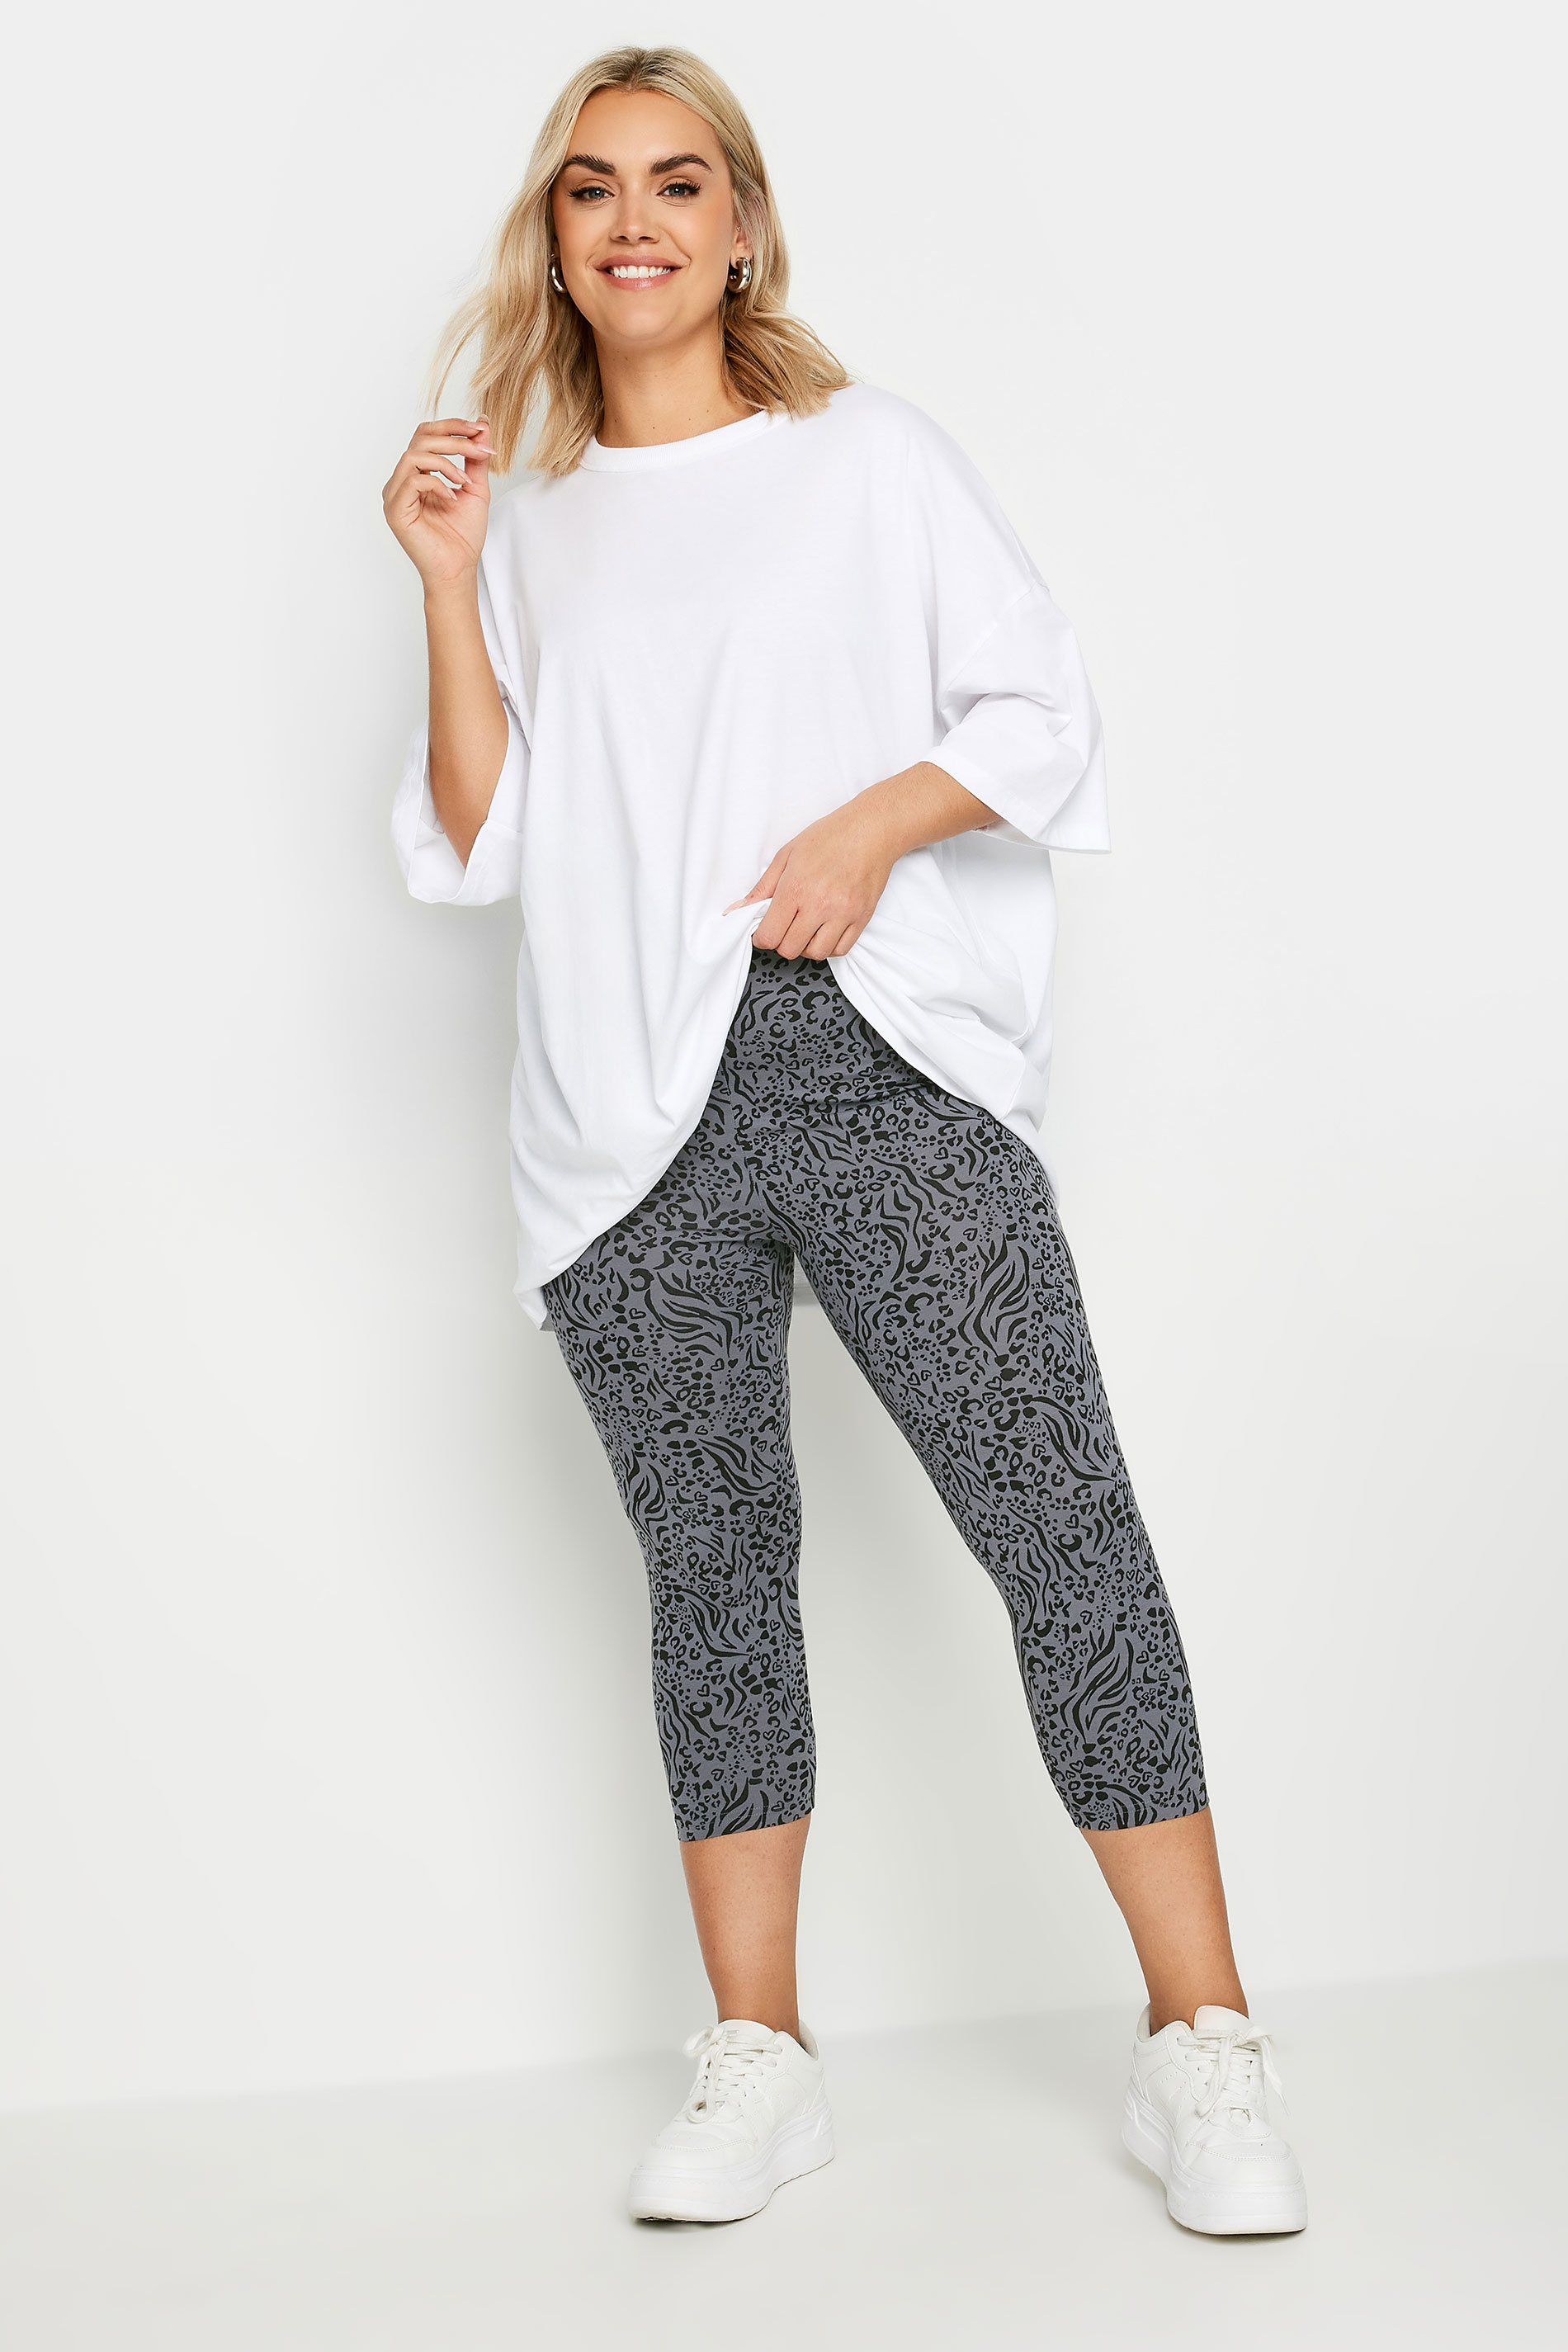 YOURS Plus Size 2 PACK Grey Animal Print Cropped Leggings | Yours Clothing 2